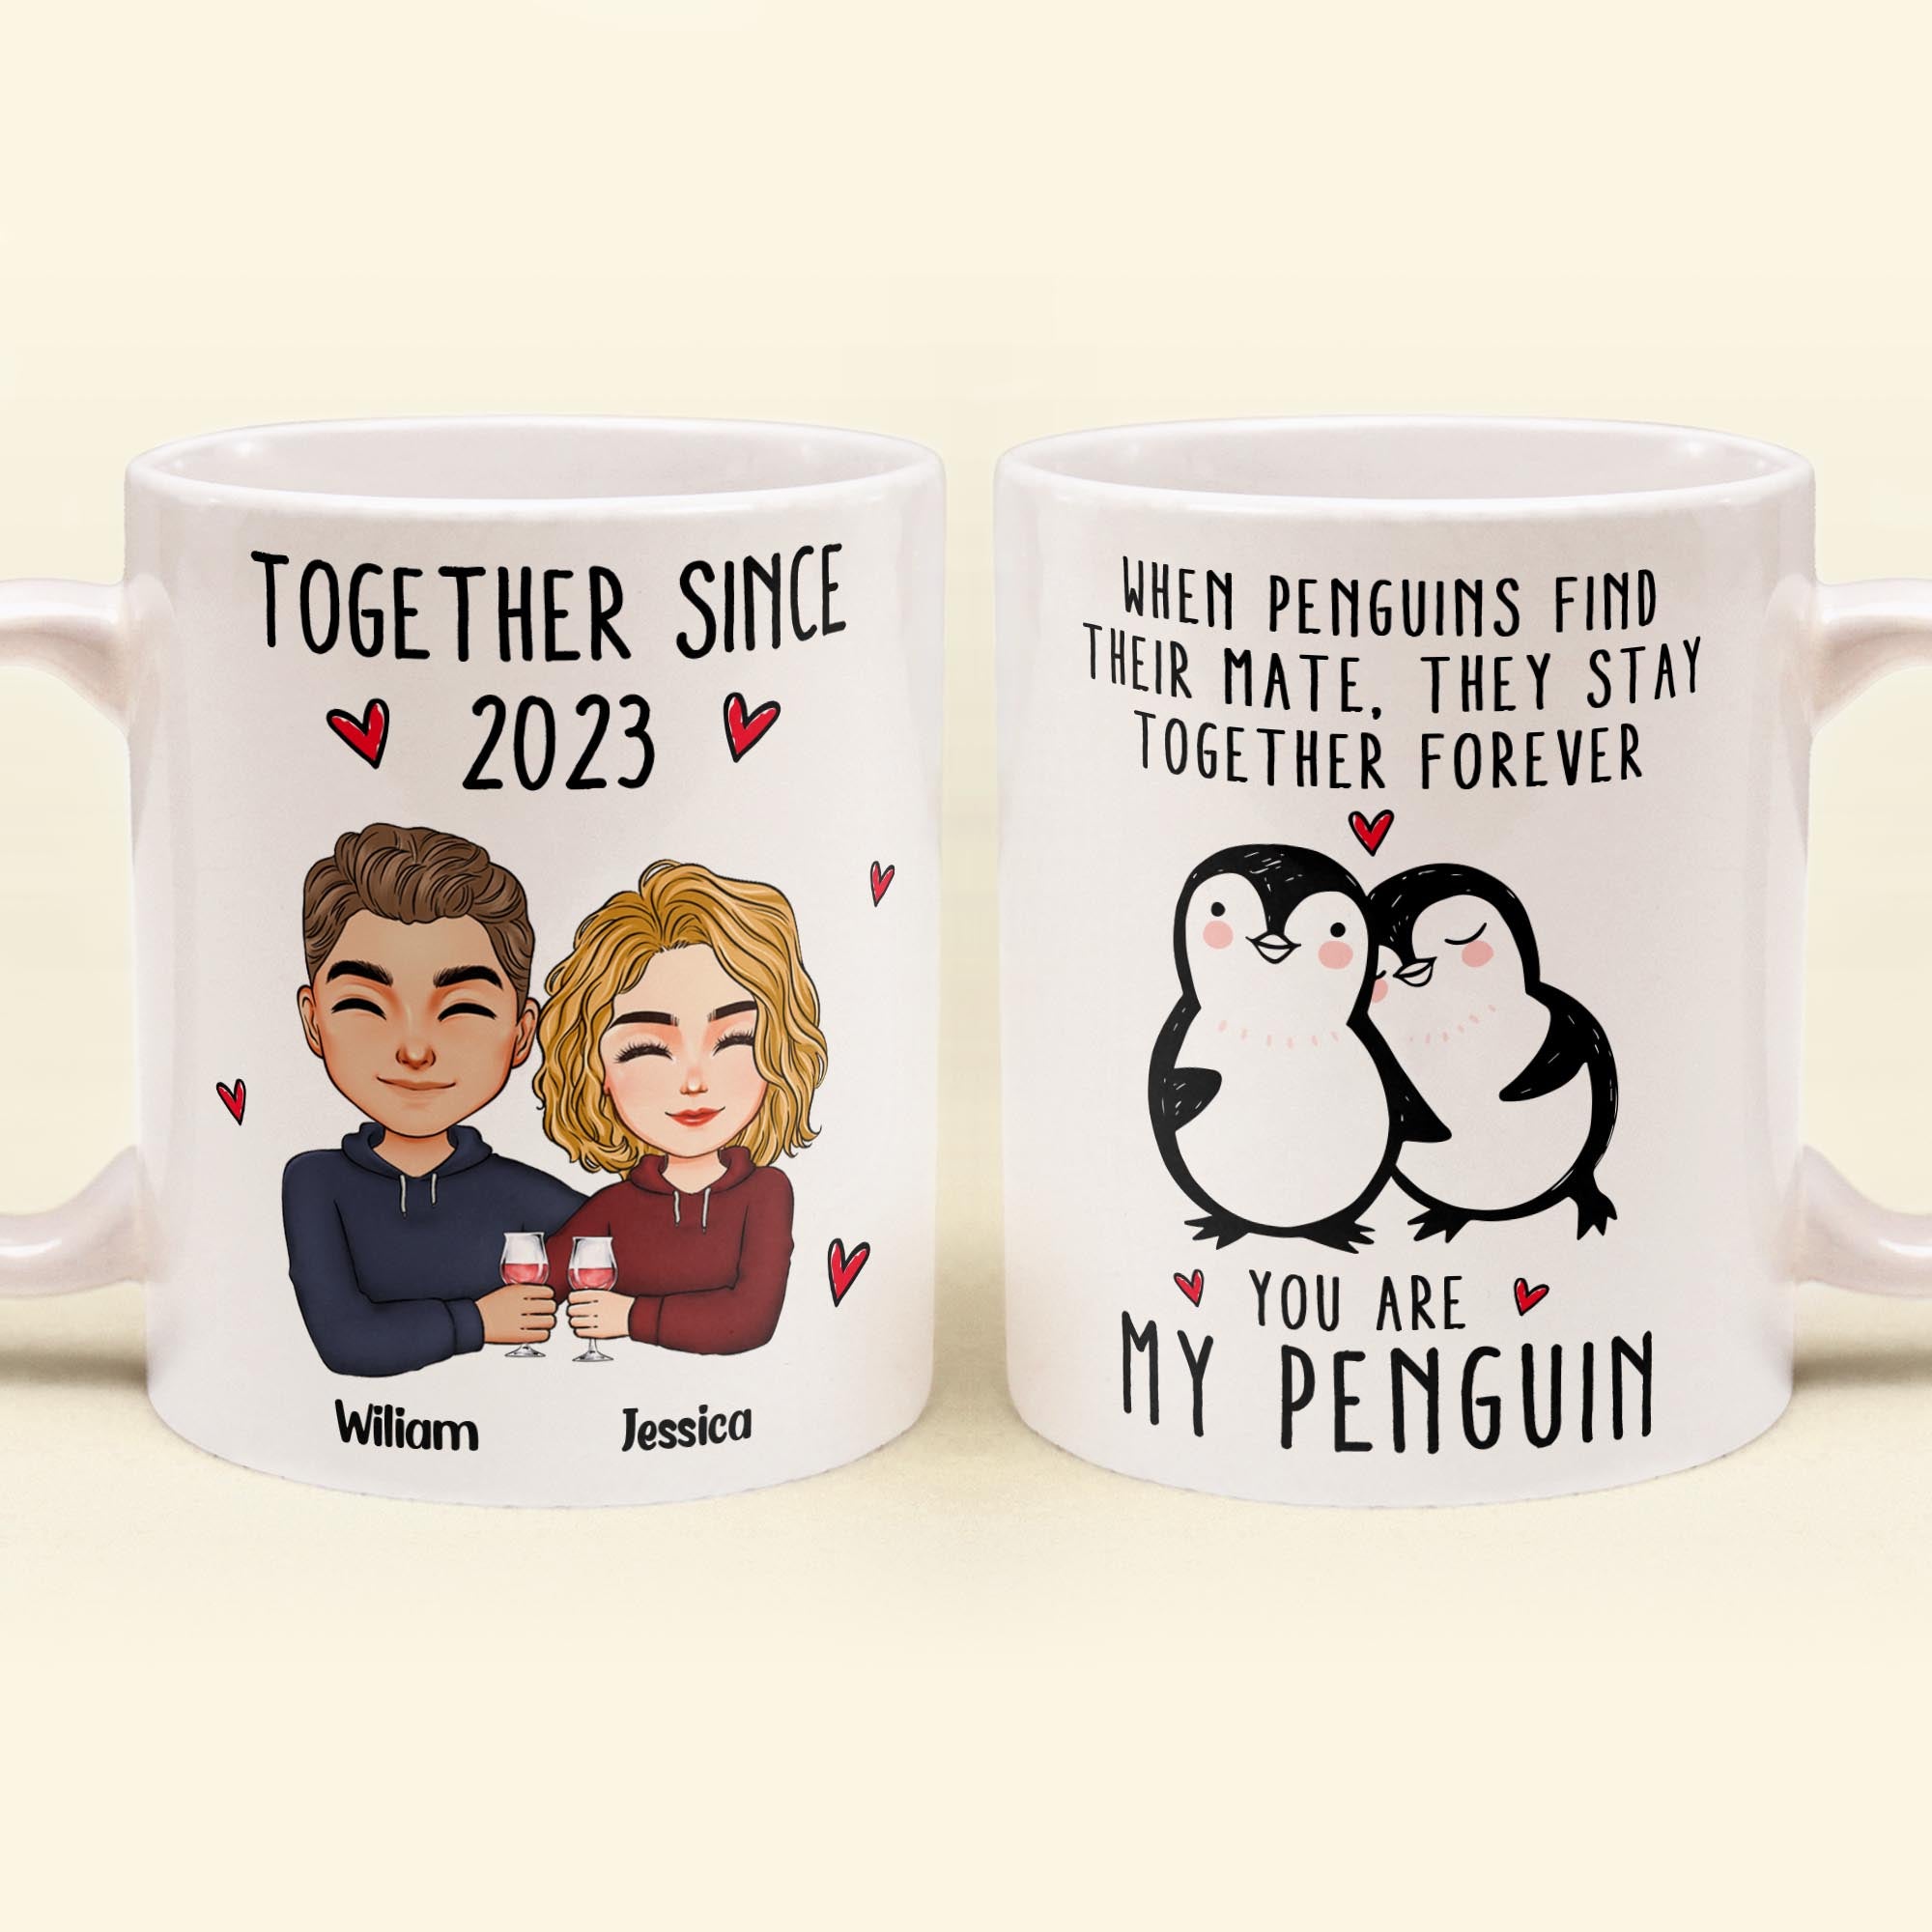 https://macorner.co/cdn/shop/files/When-Penguins-Find-Their-Mate_-They-Stay-Together-Forever-Personalized-Mug_5_2000x.jpg?v=1685608234